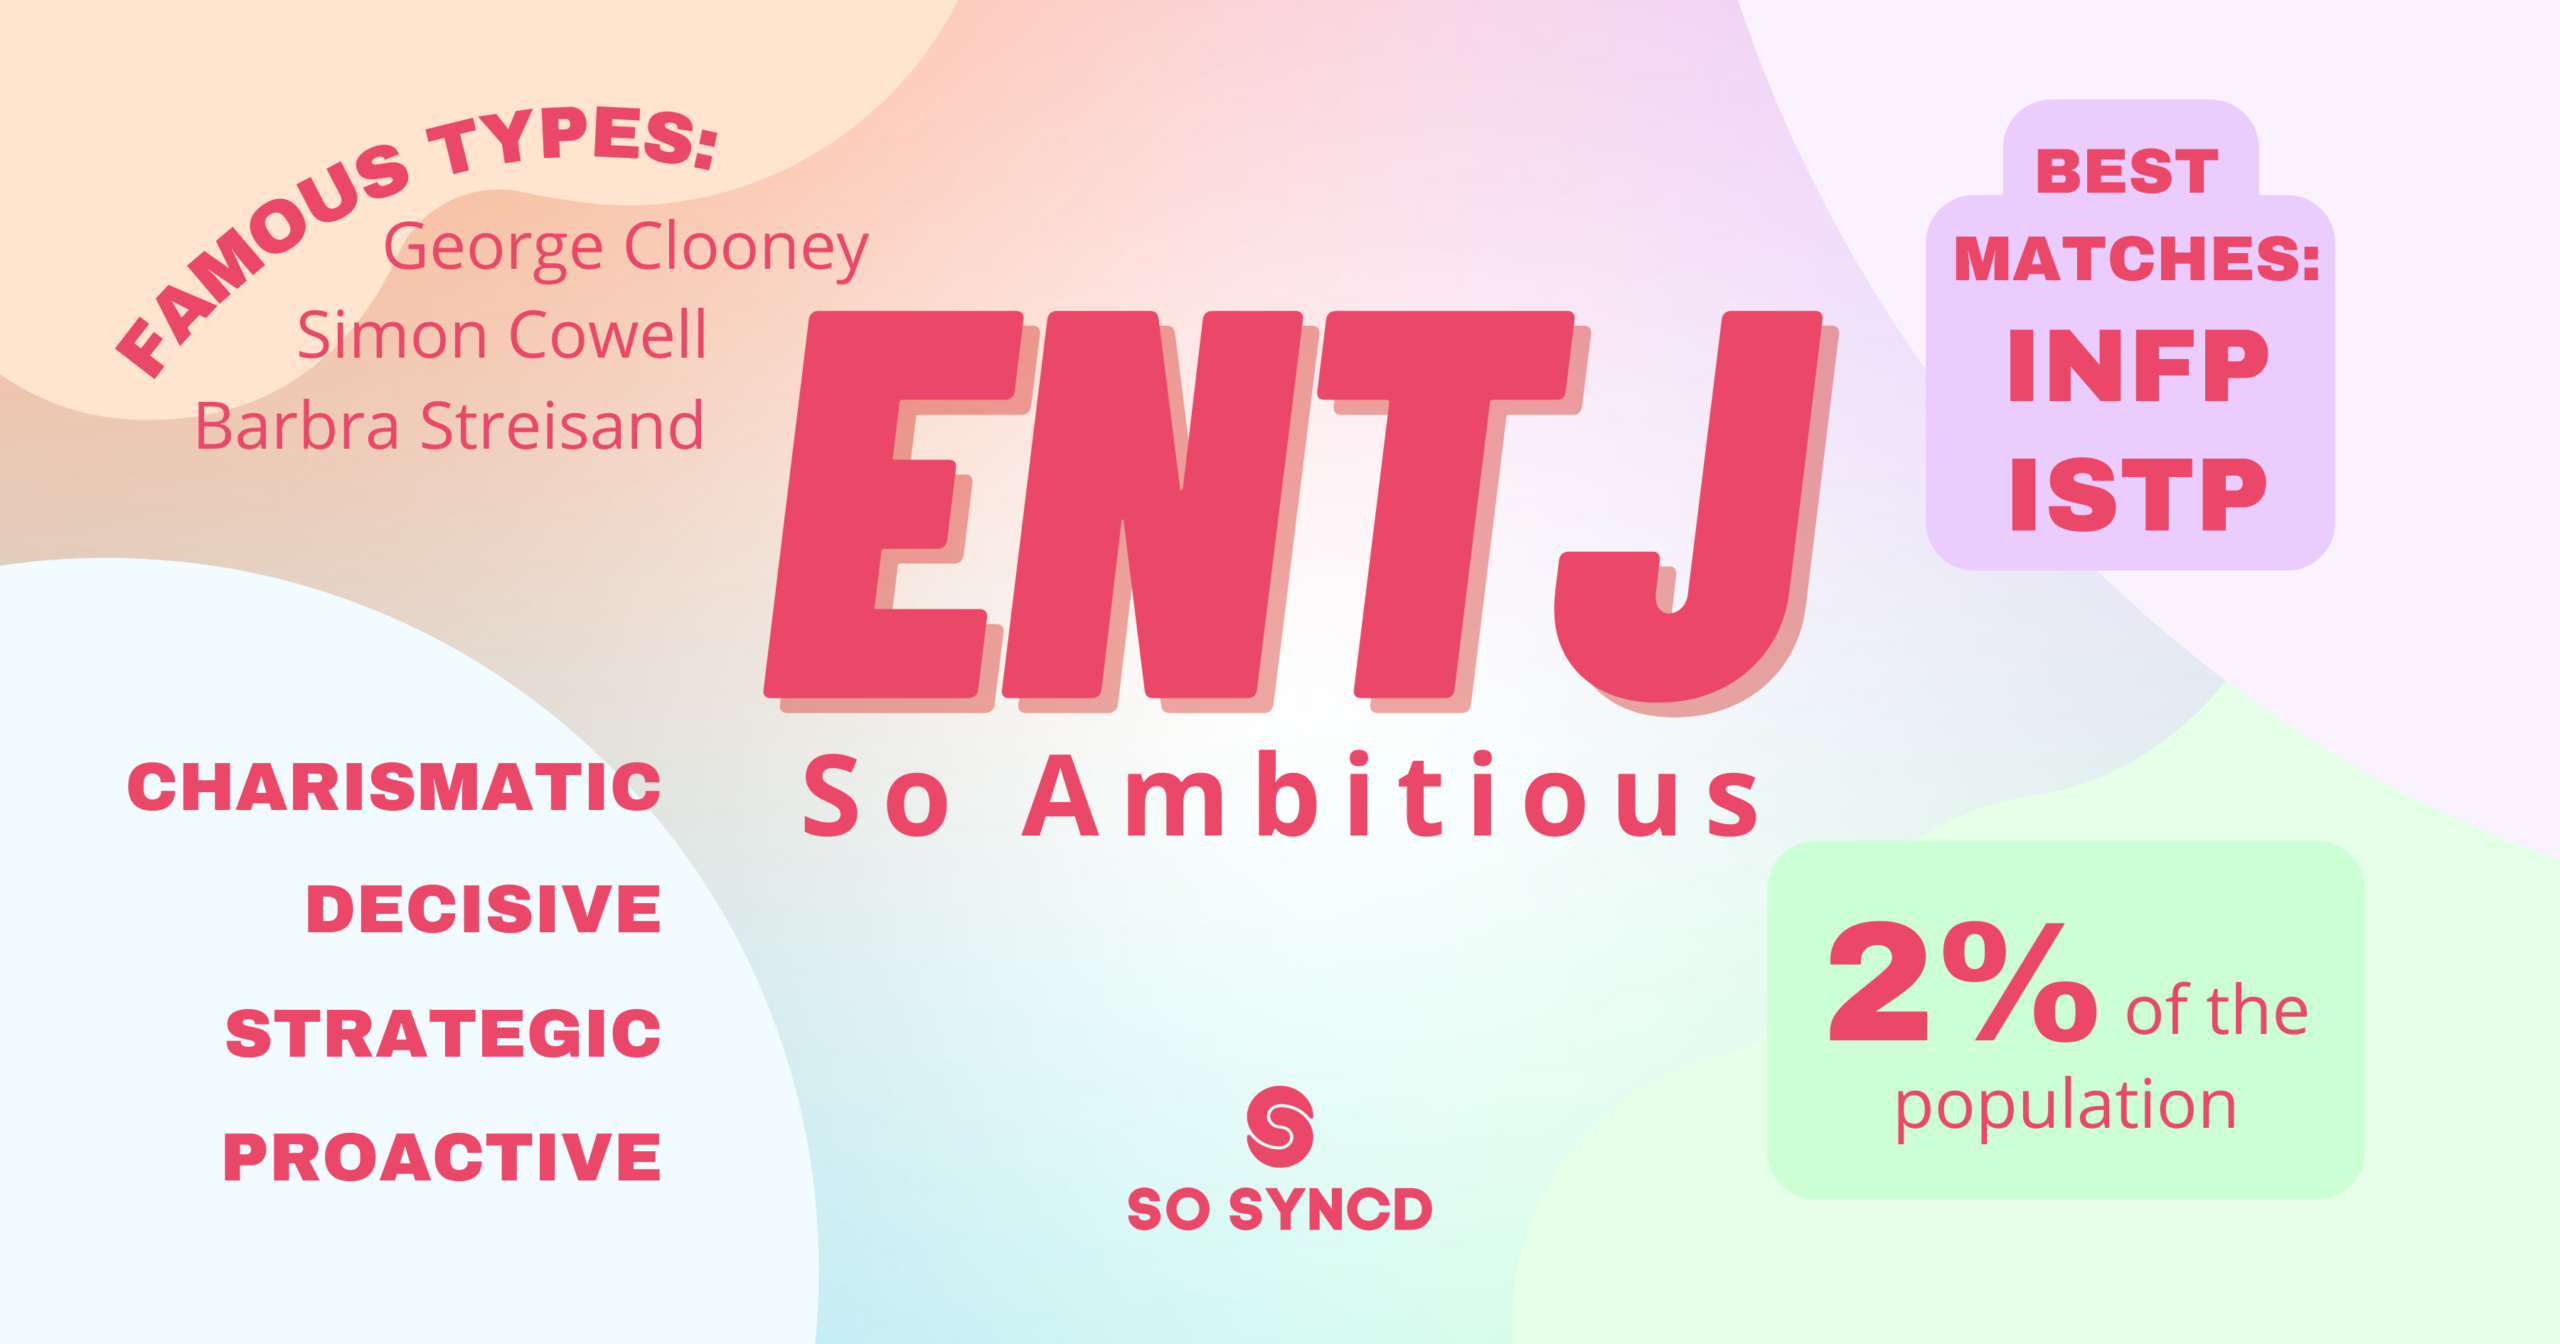 Compliments that hit differently for #ENTJ personality types! What's y